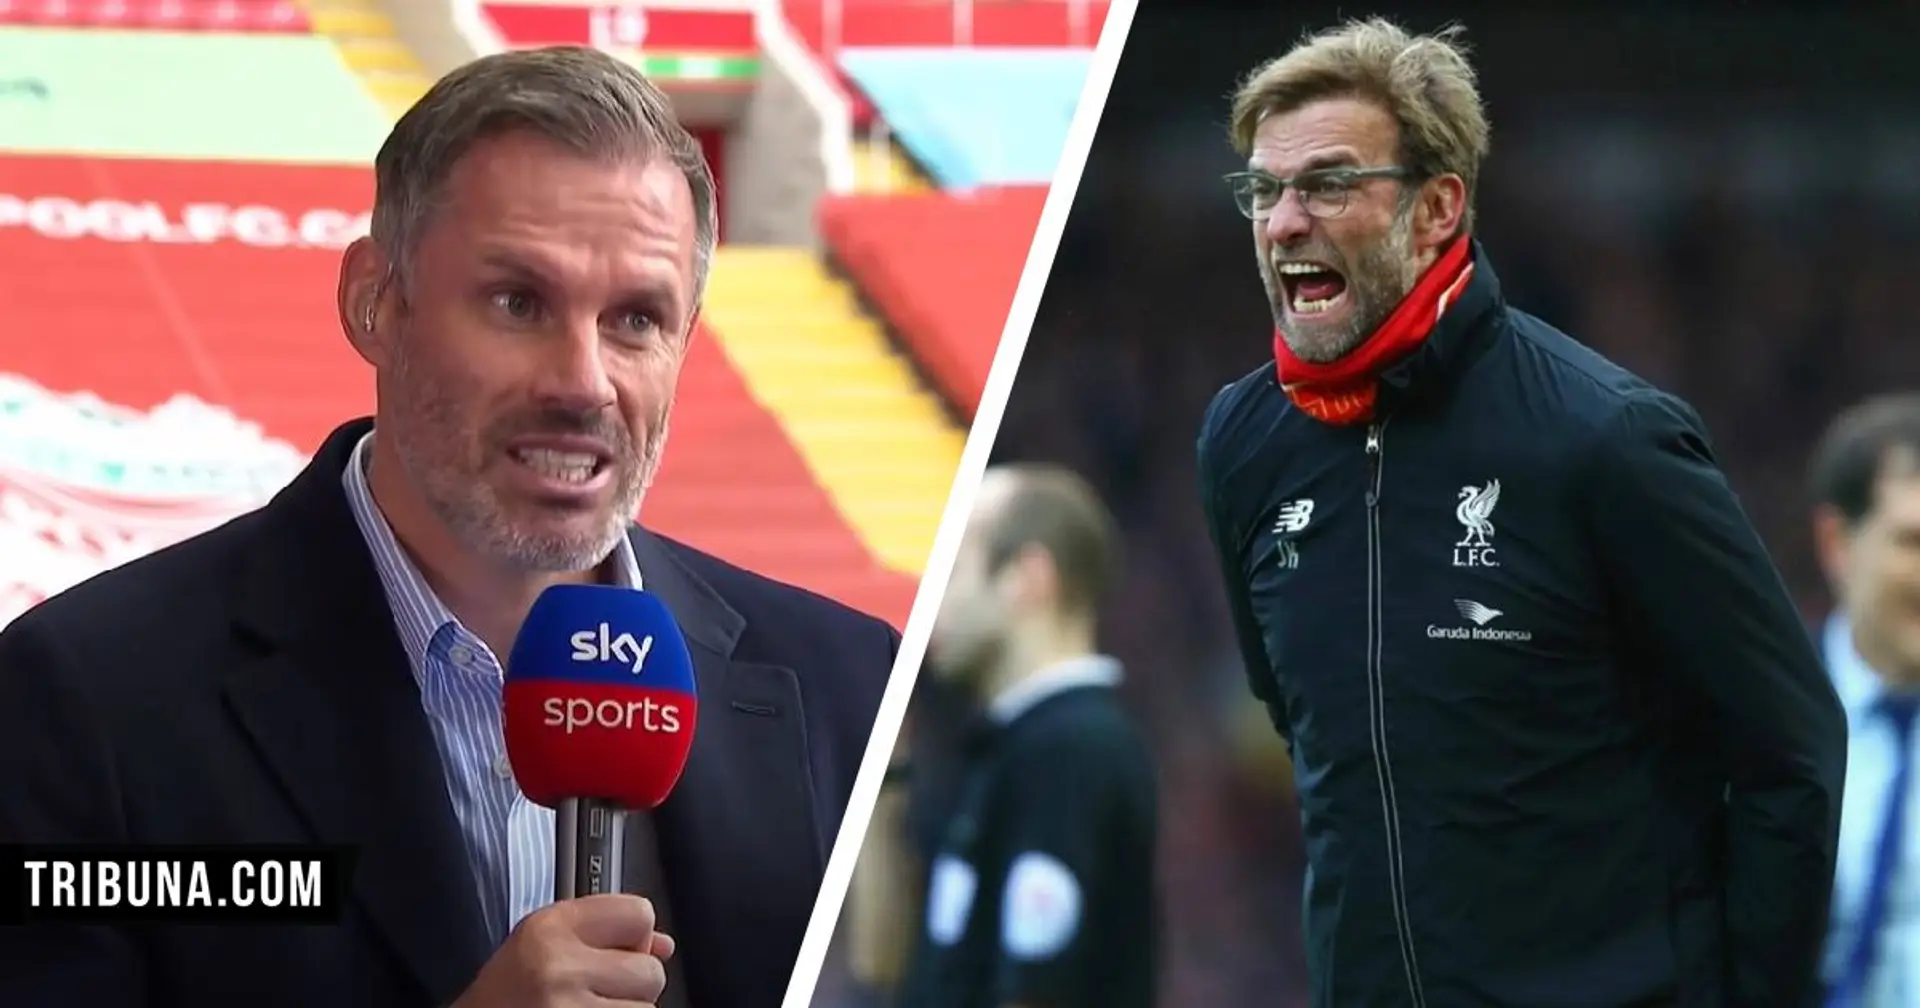 Klopp-Carra dispute - What's happening and who's right? Explained in 90 seconds